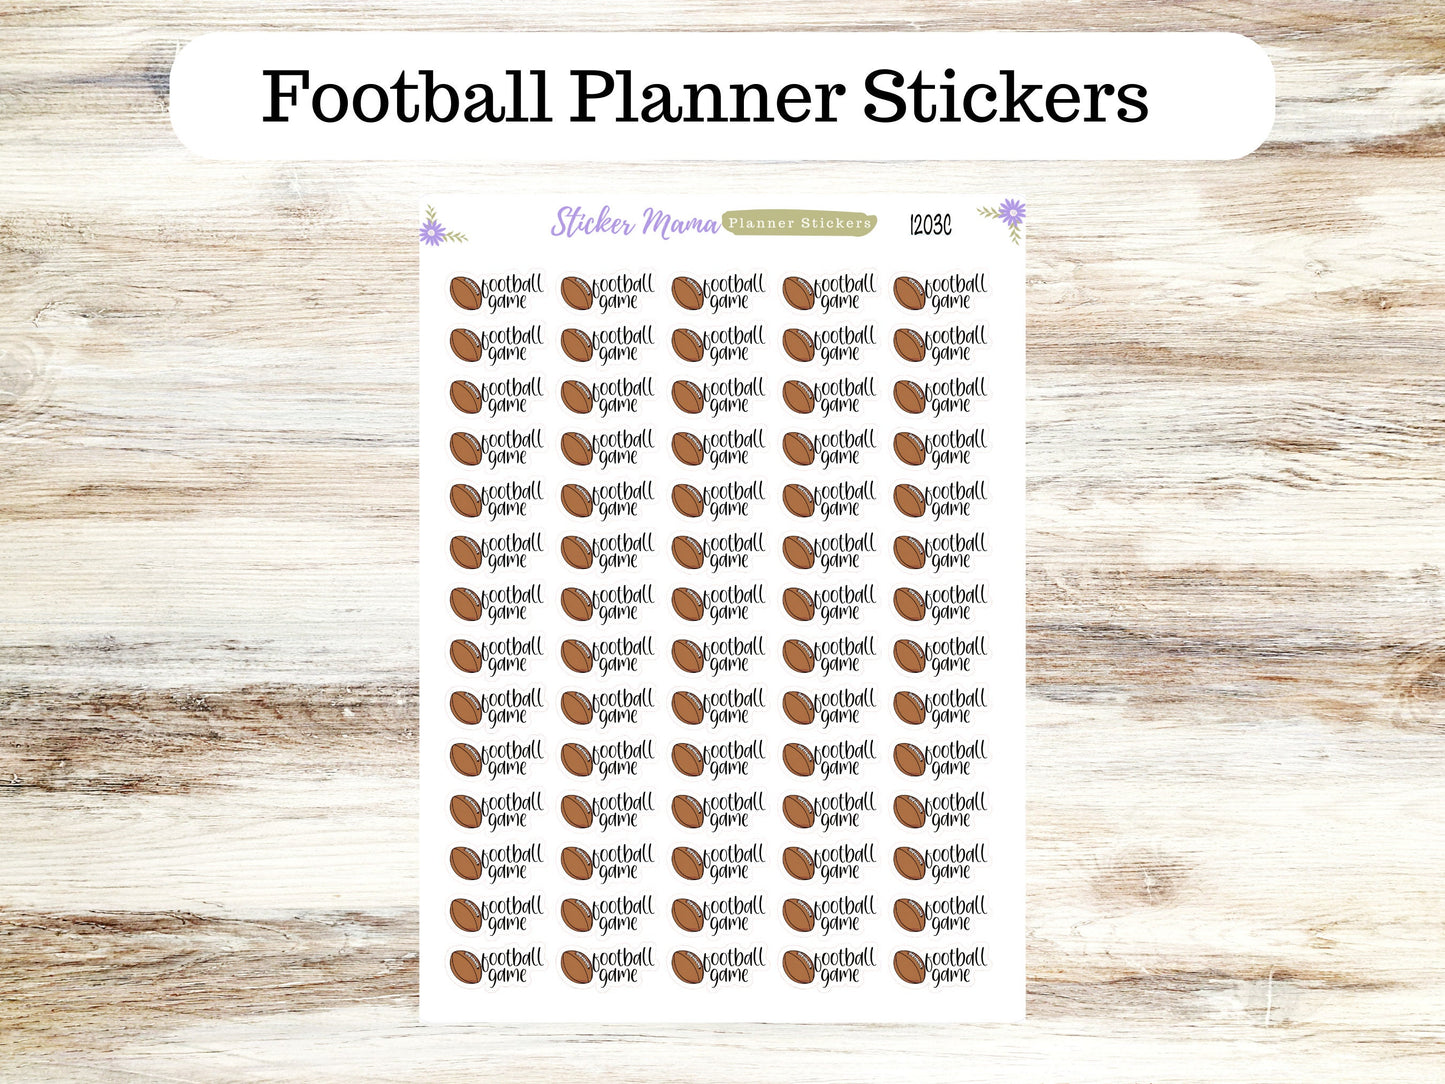 1203 FOOTBALL GAME STICKERS || Football Planner Stickers || Football Sports Stickers || Football Games || Football Practice